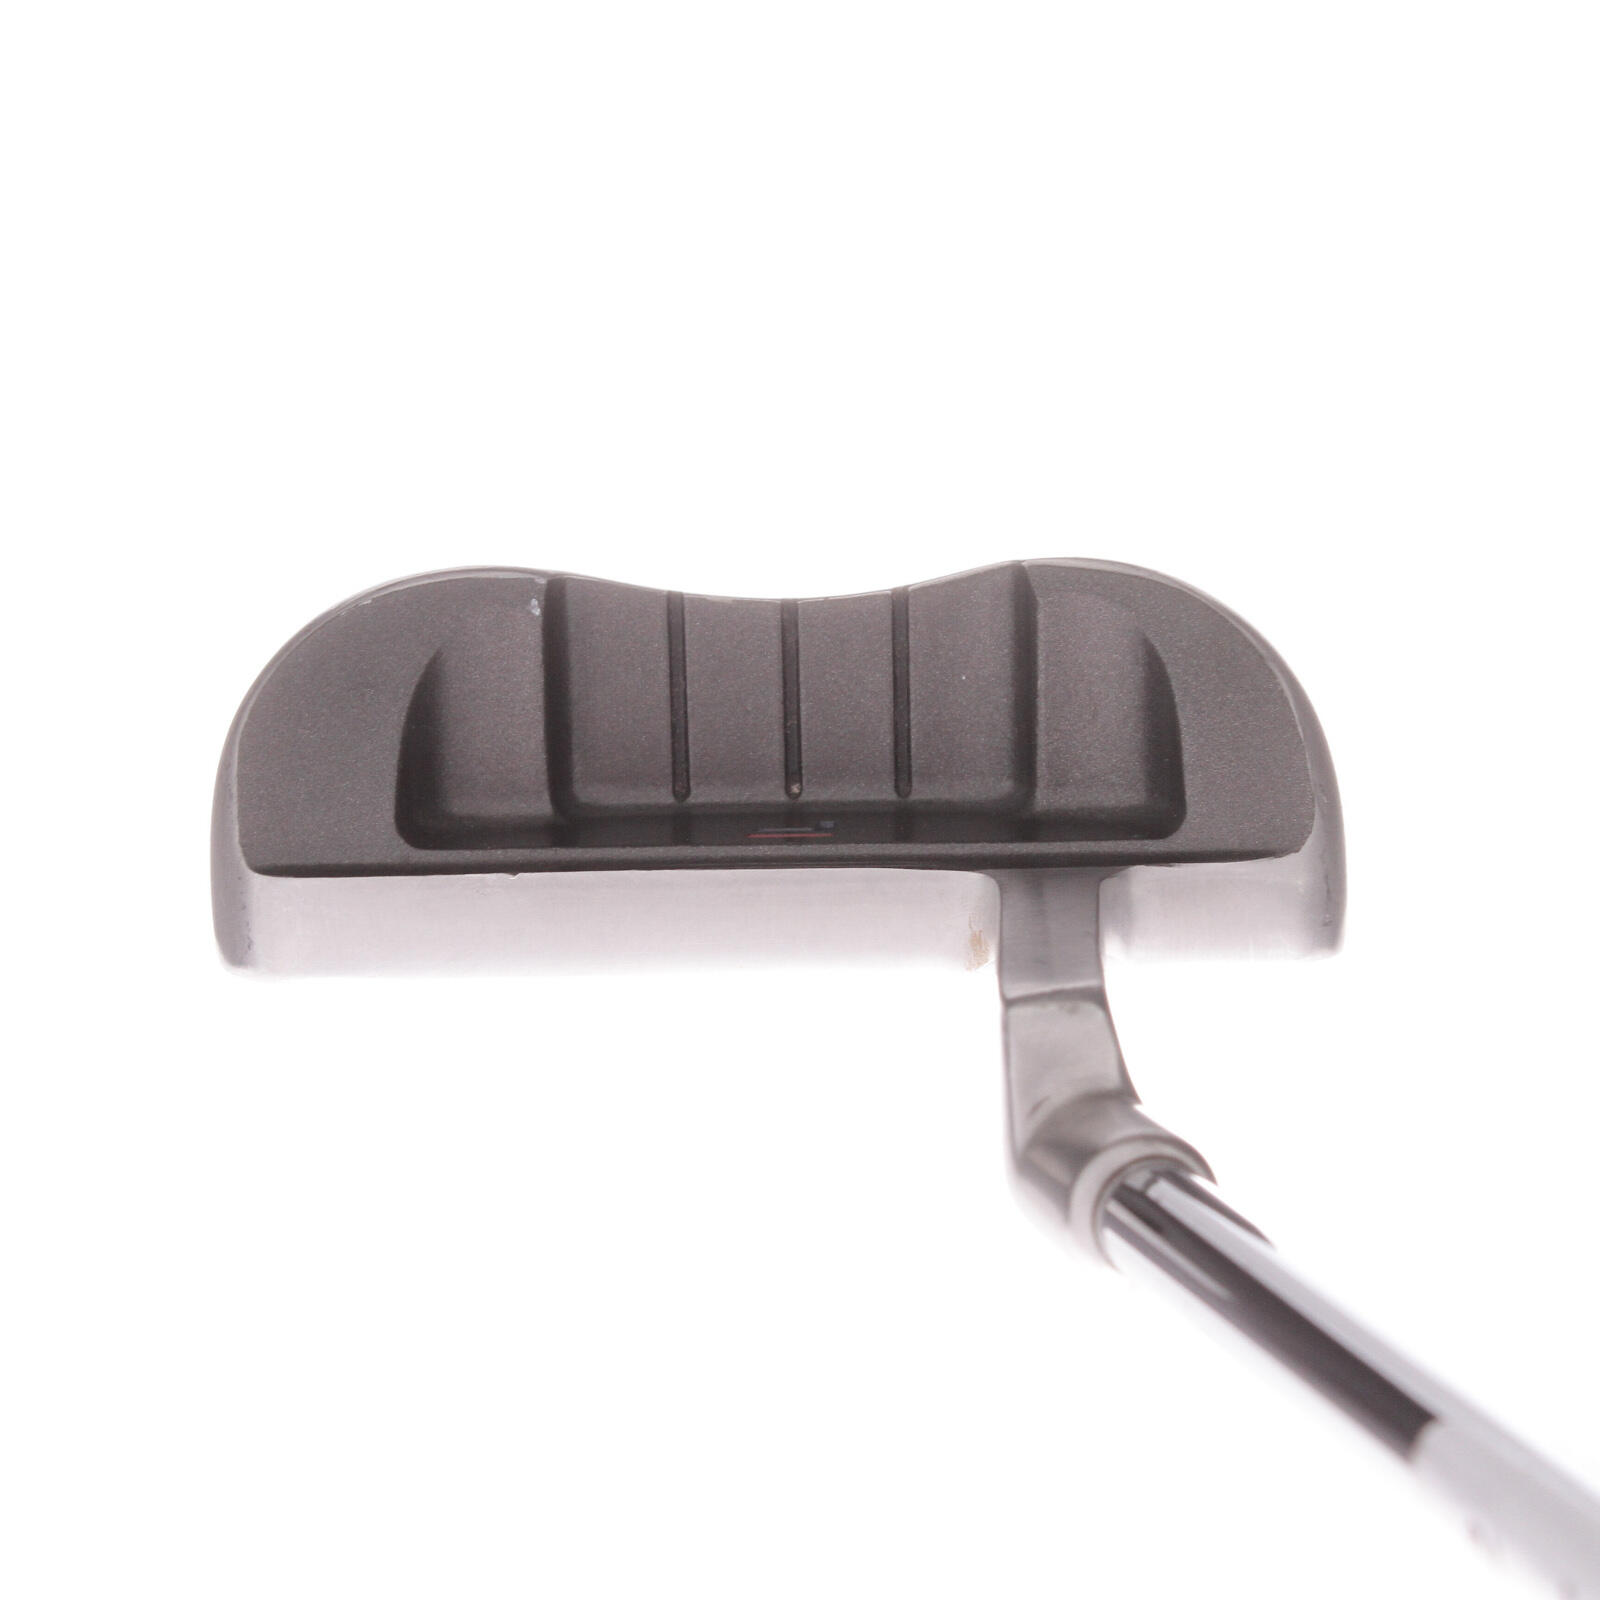 USED - Fila Original Stainless Putter 34 Inches Steel Shaft Right Hand - GRADE C 2/6